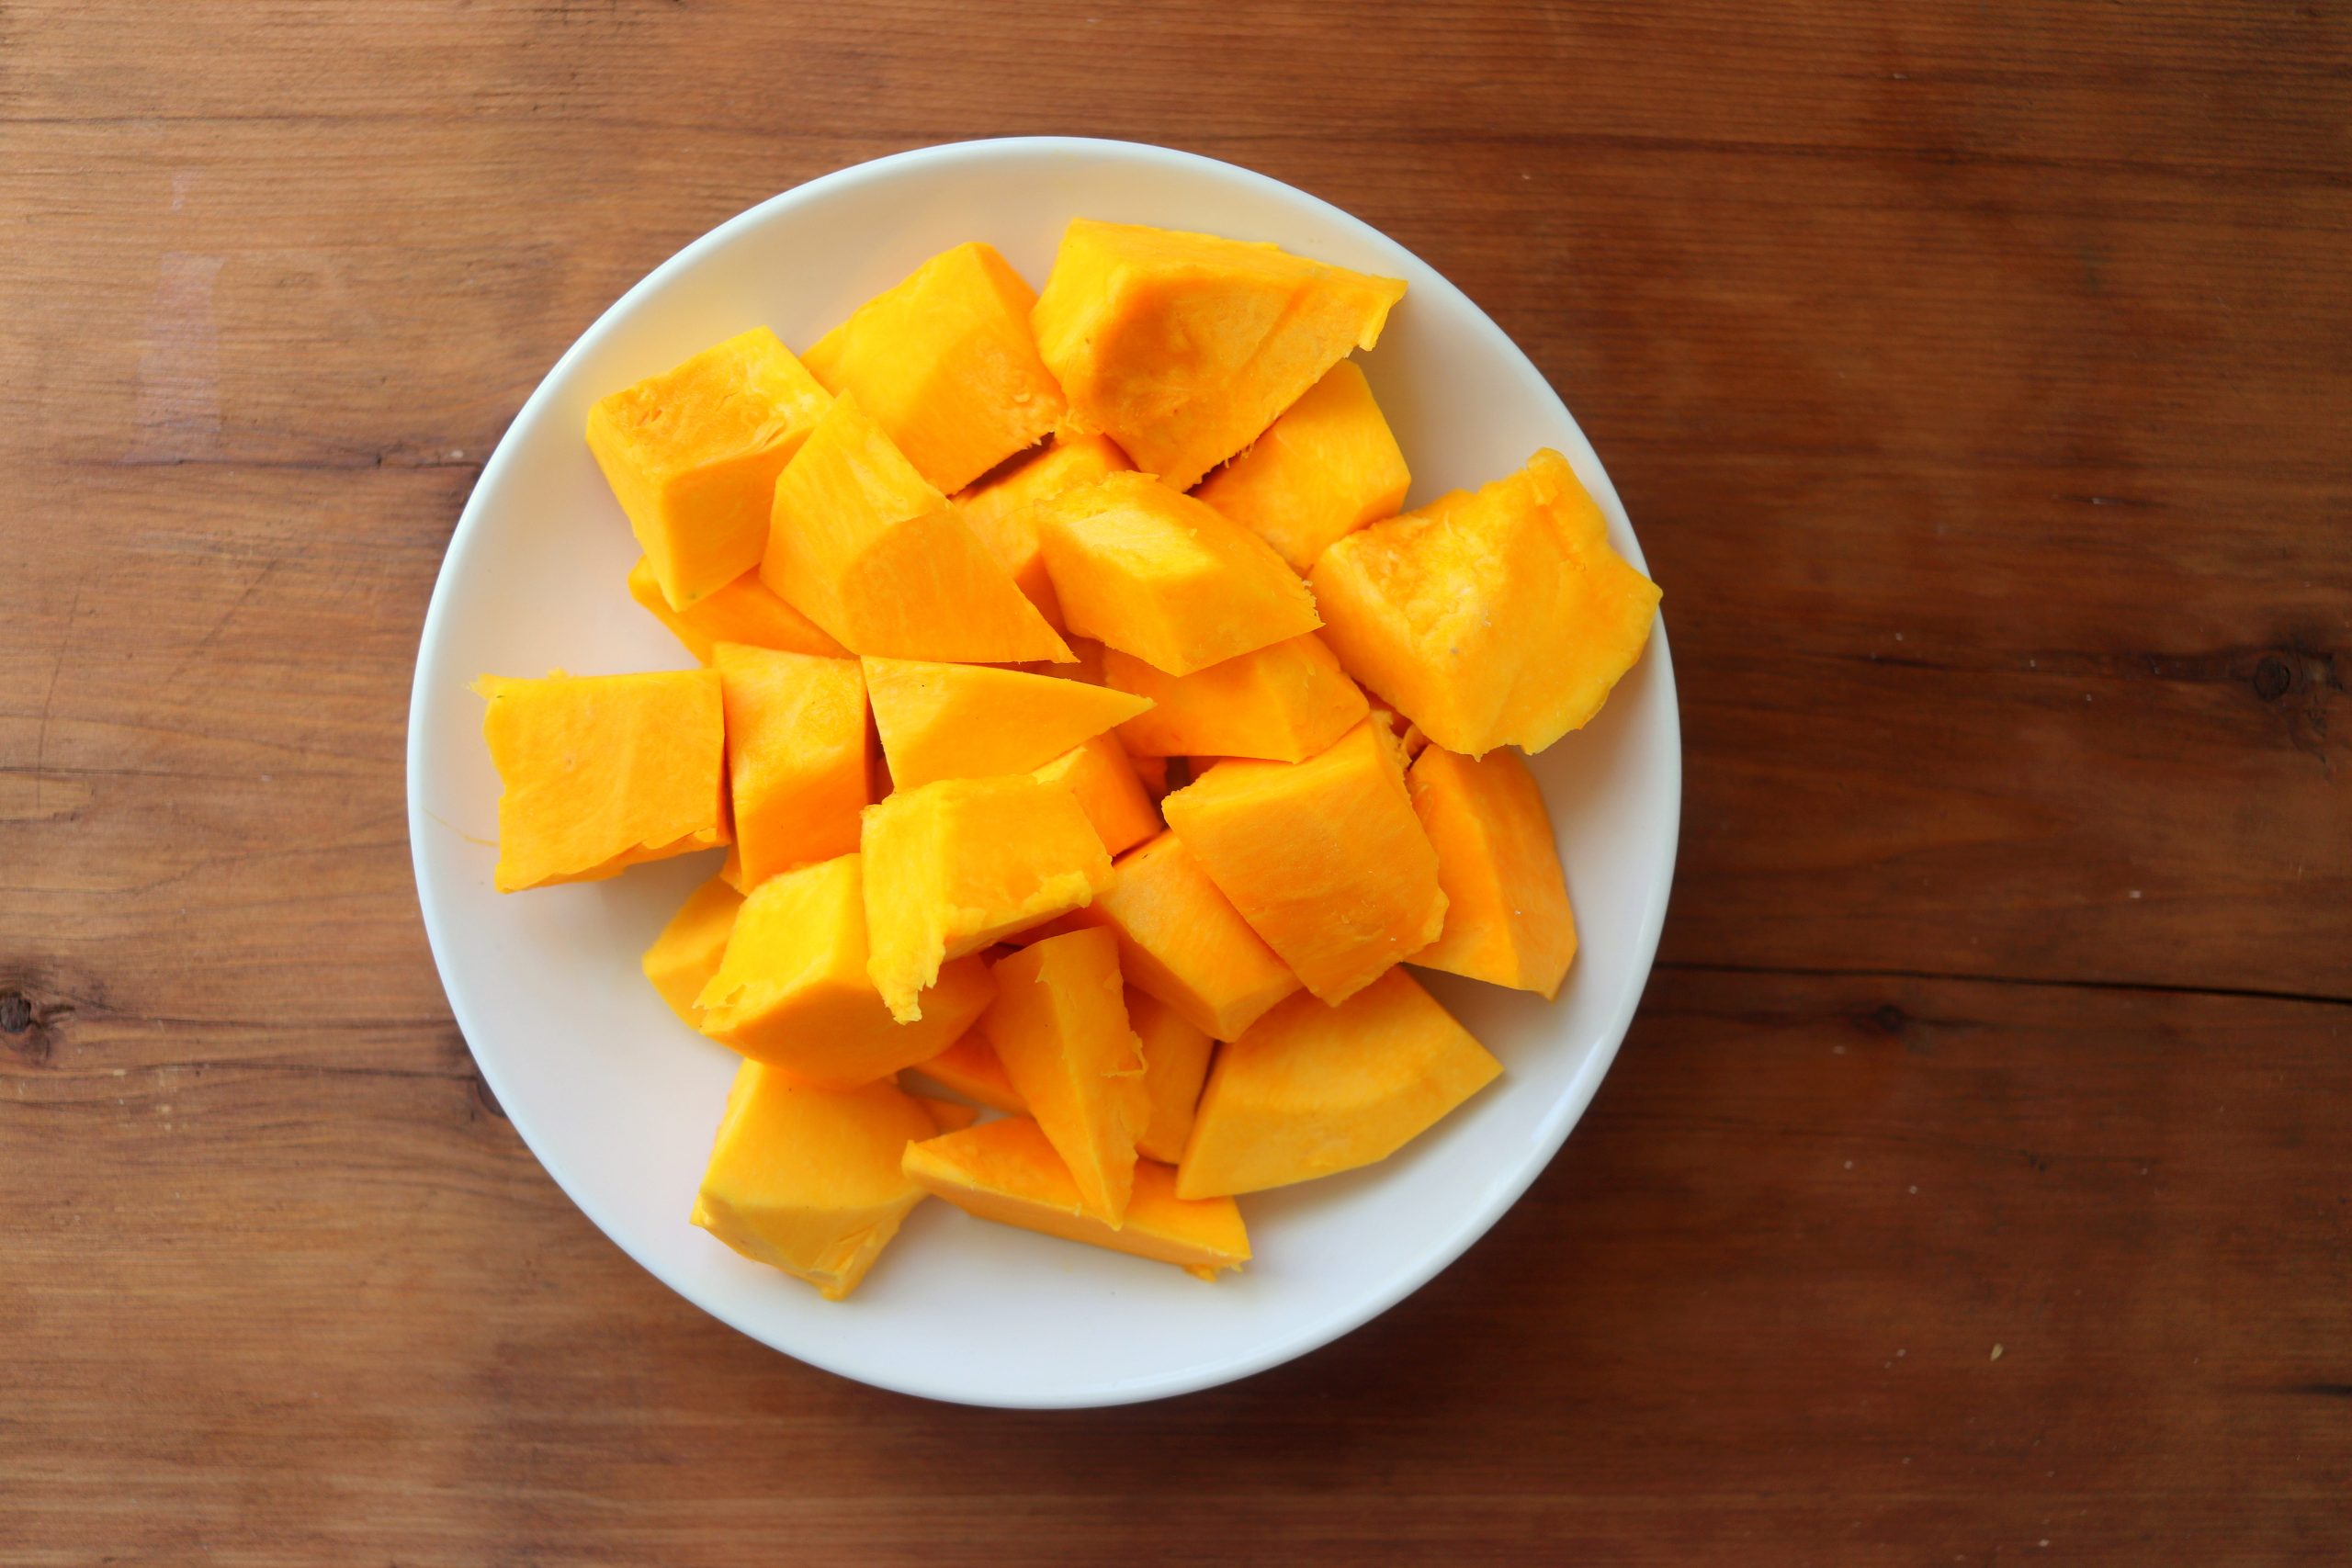 A plate filled with diced chunks of squash.